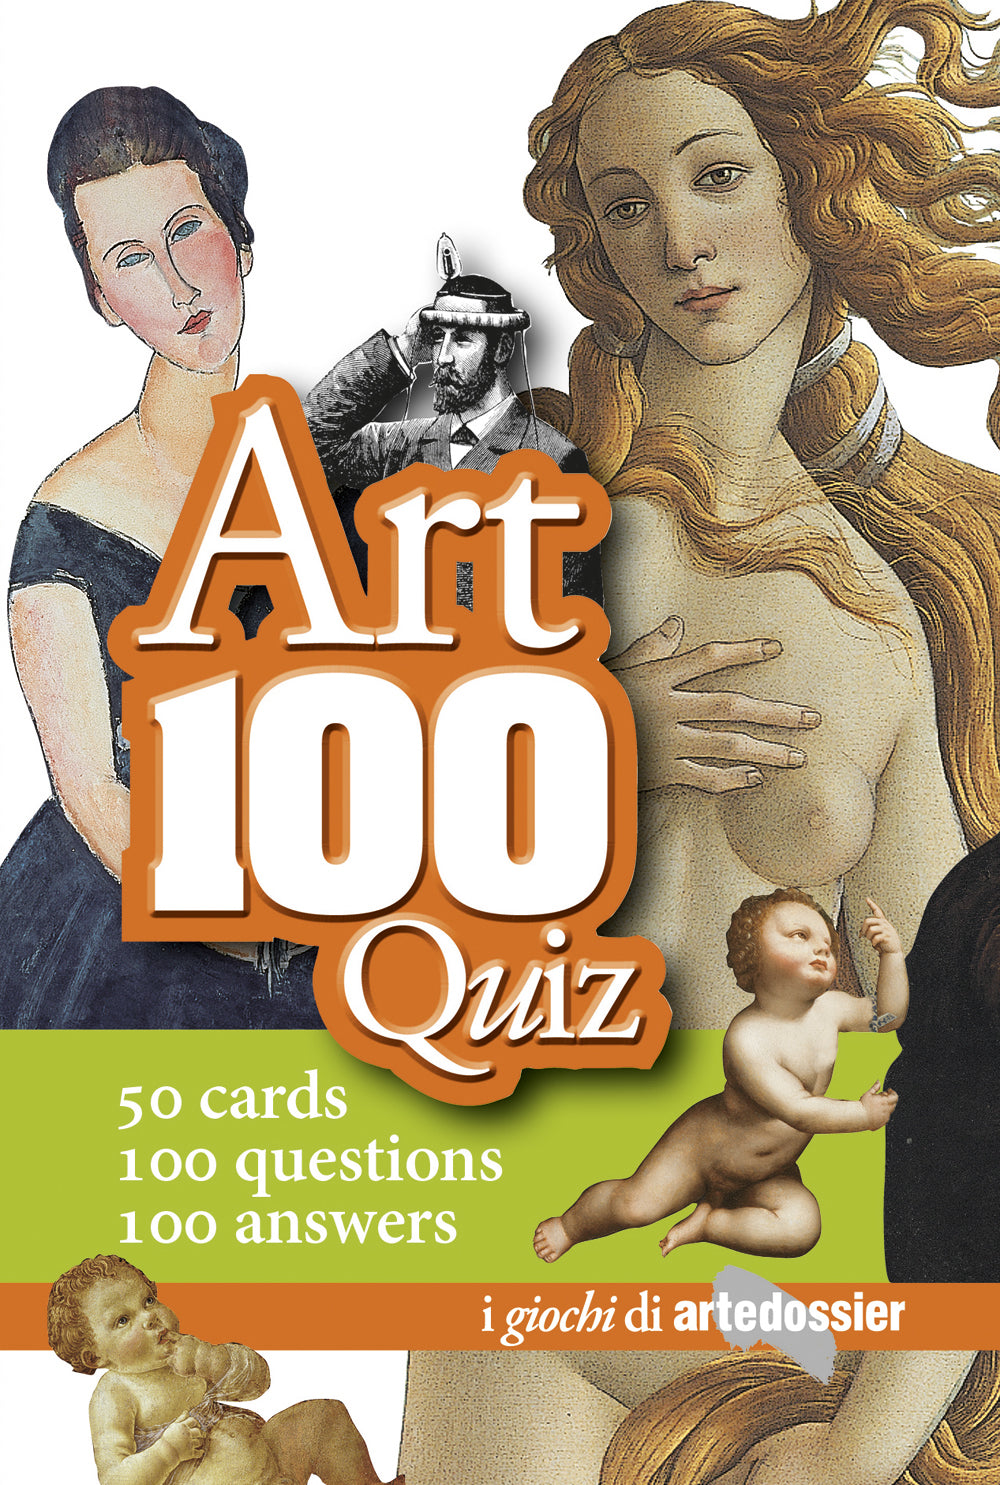 Art 100 quiz ::50 cards, 100 questions, 100 answers